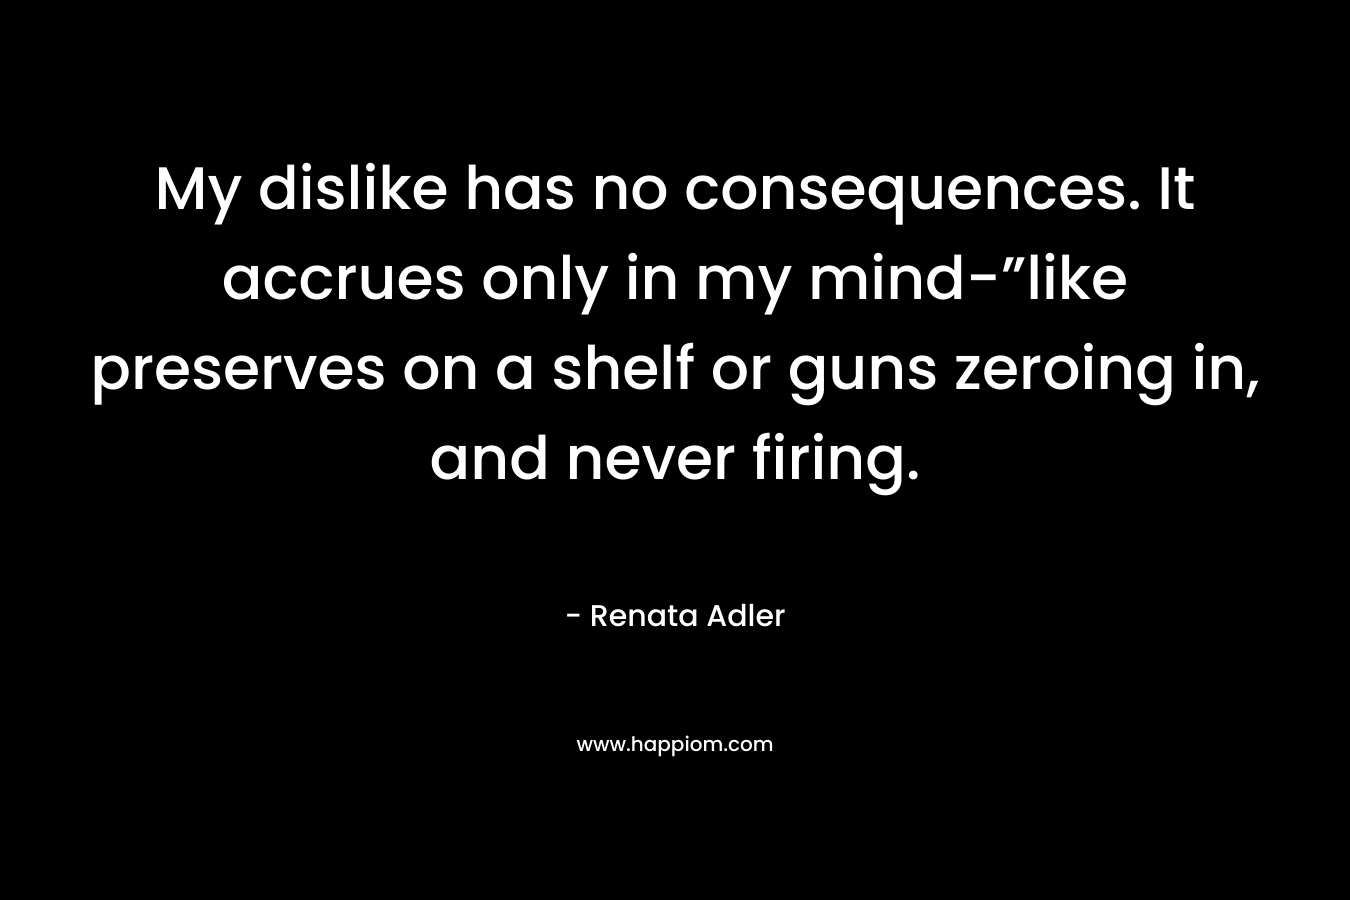 My dislike has no consequences. It accrues only in my mind-”like preserves on a shelf or guns zeroing in, and never firing. – Renata Adler